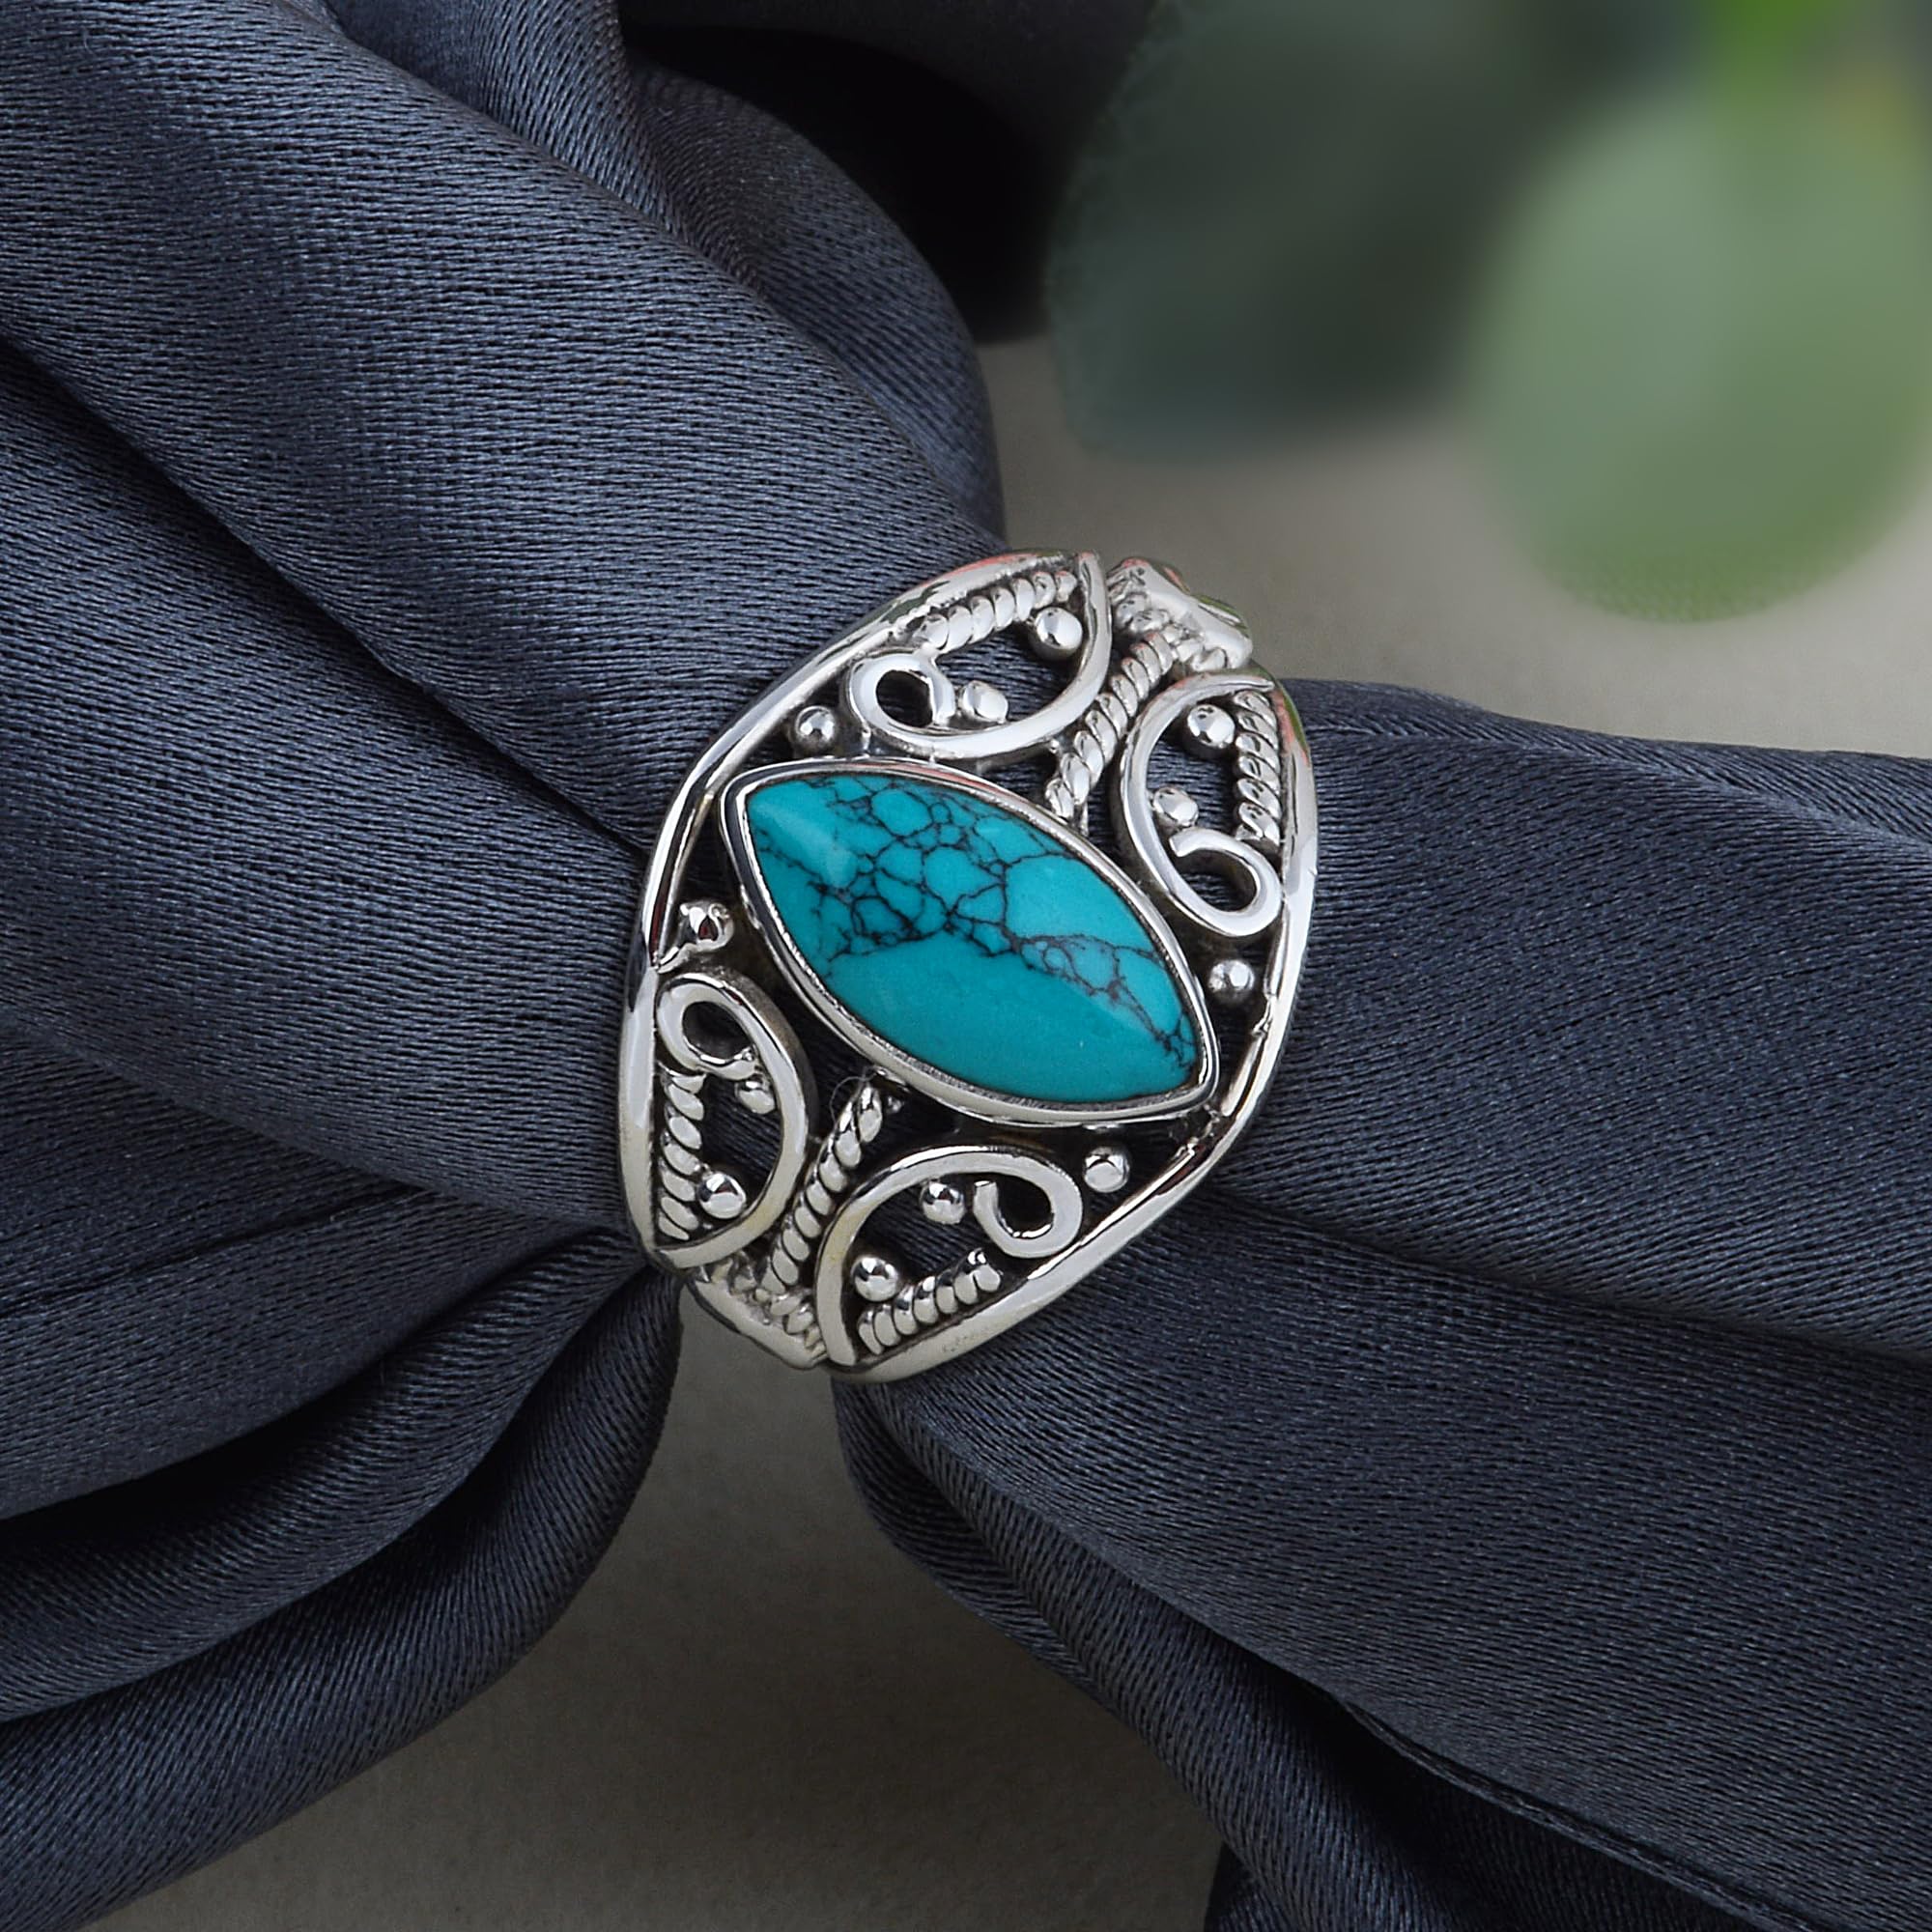 Silver Eternity Native American Style Turquoise 925 Sterling Silver Gemstone Ring Jewelry